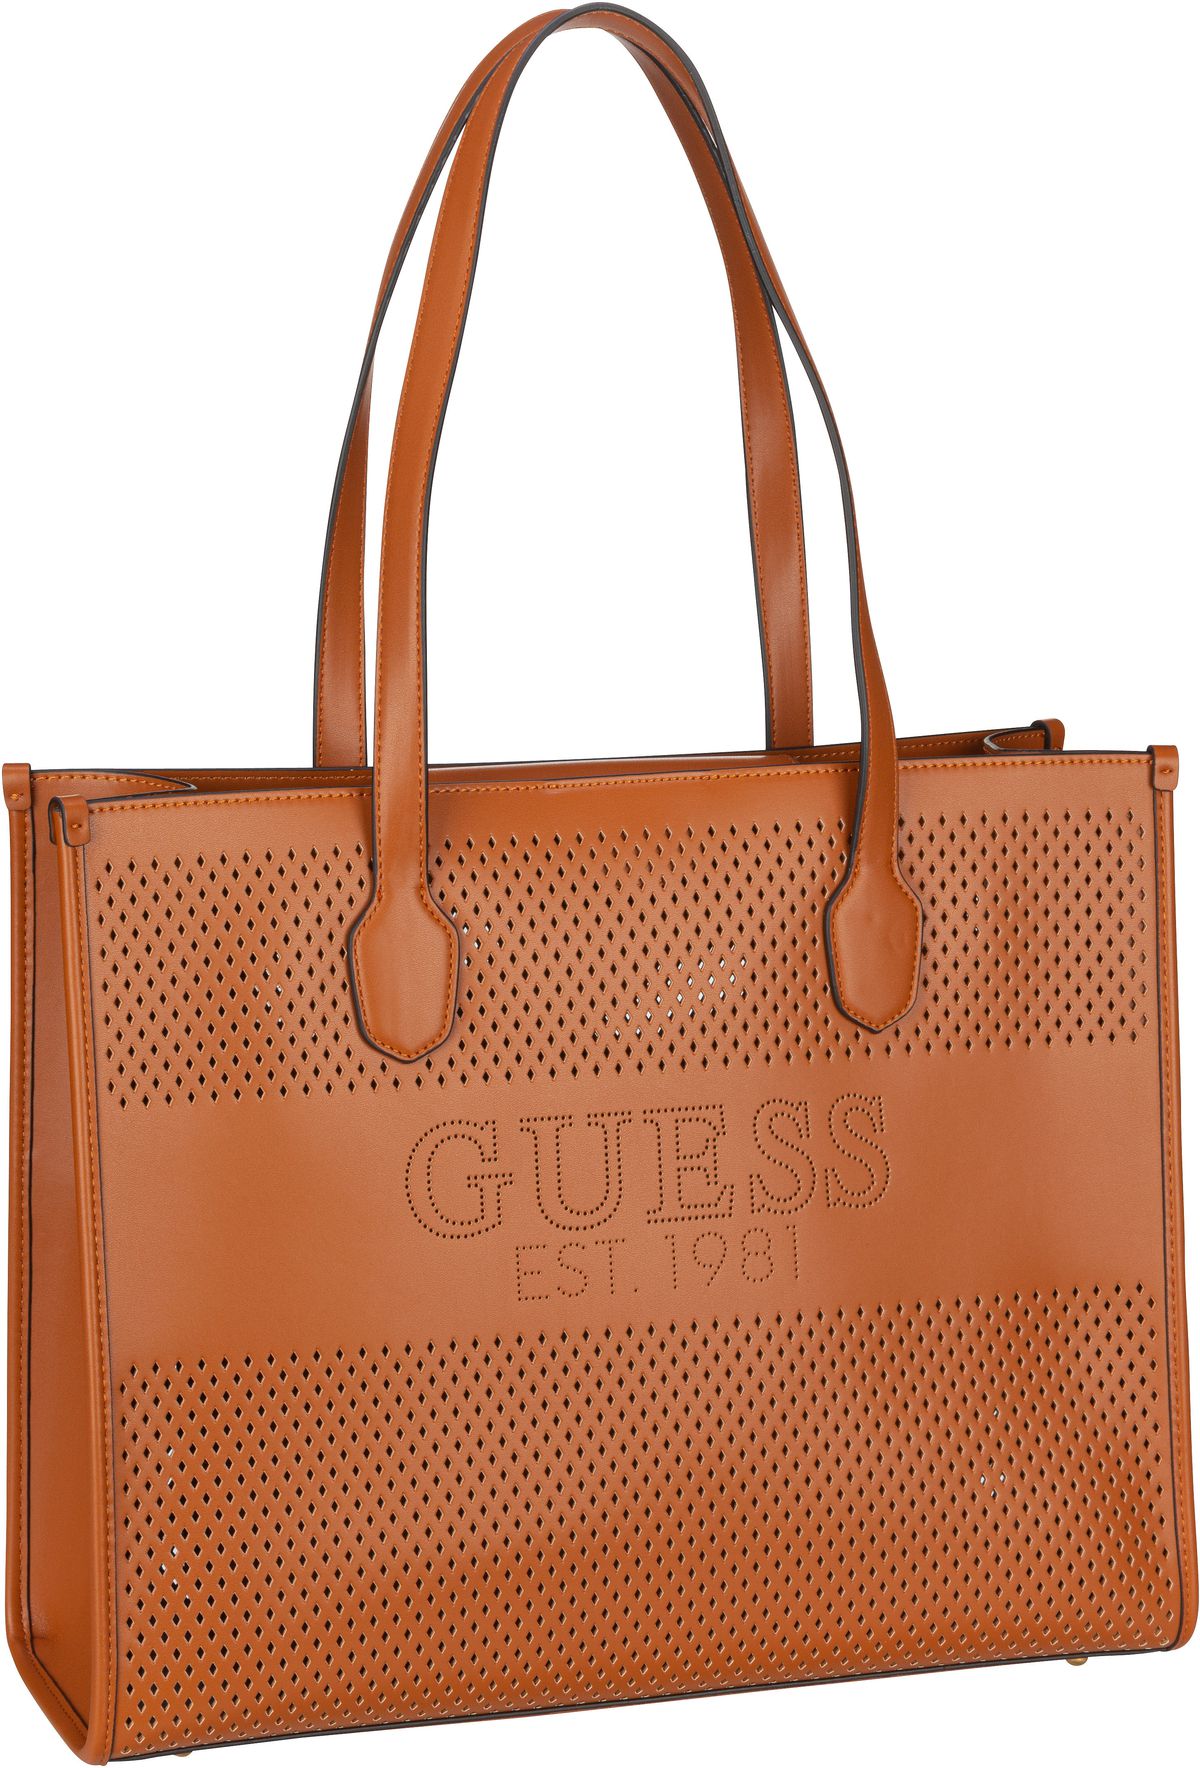 Guess Katey Tote WH - Cognac